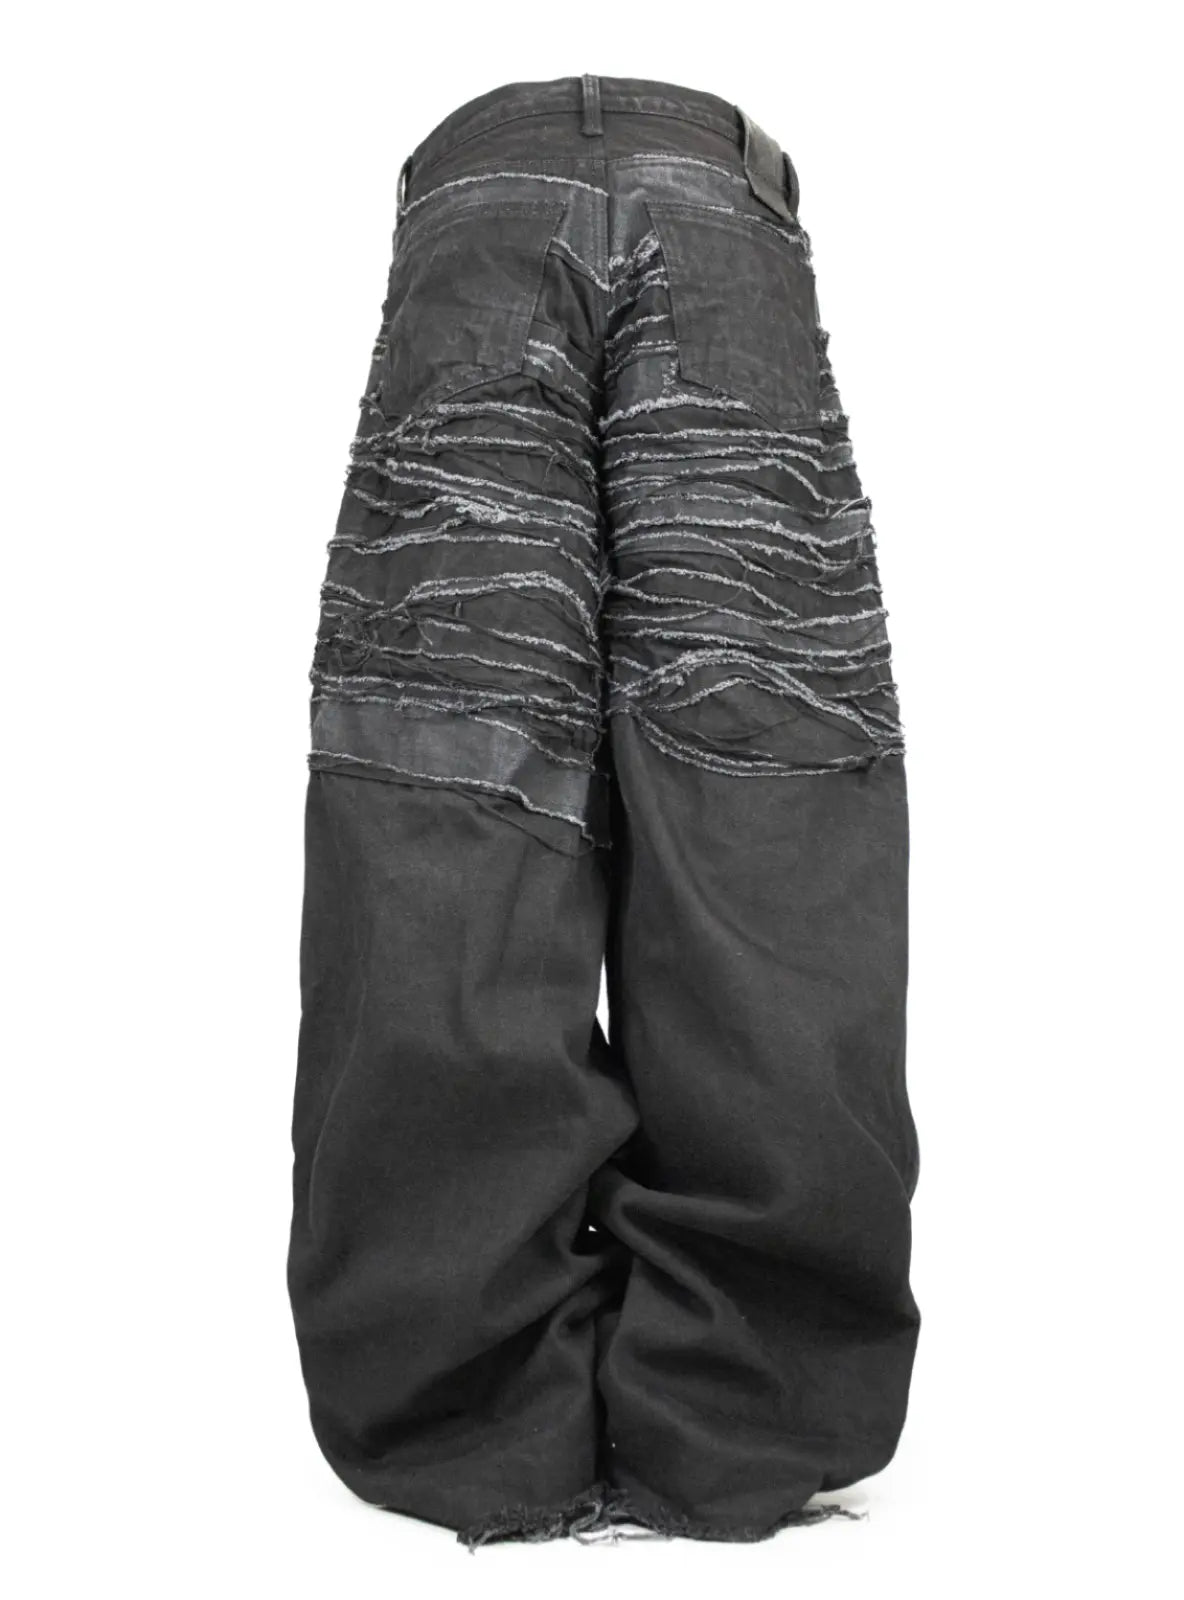 TEXTURED BAGGY JEANS LIMITED EDITION - Black